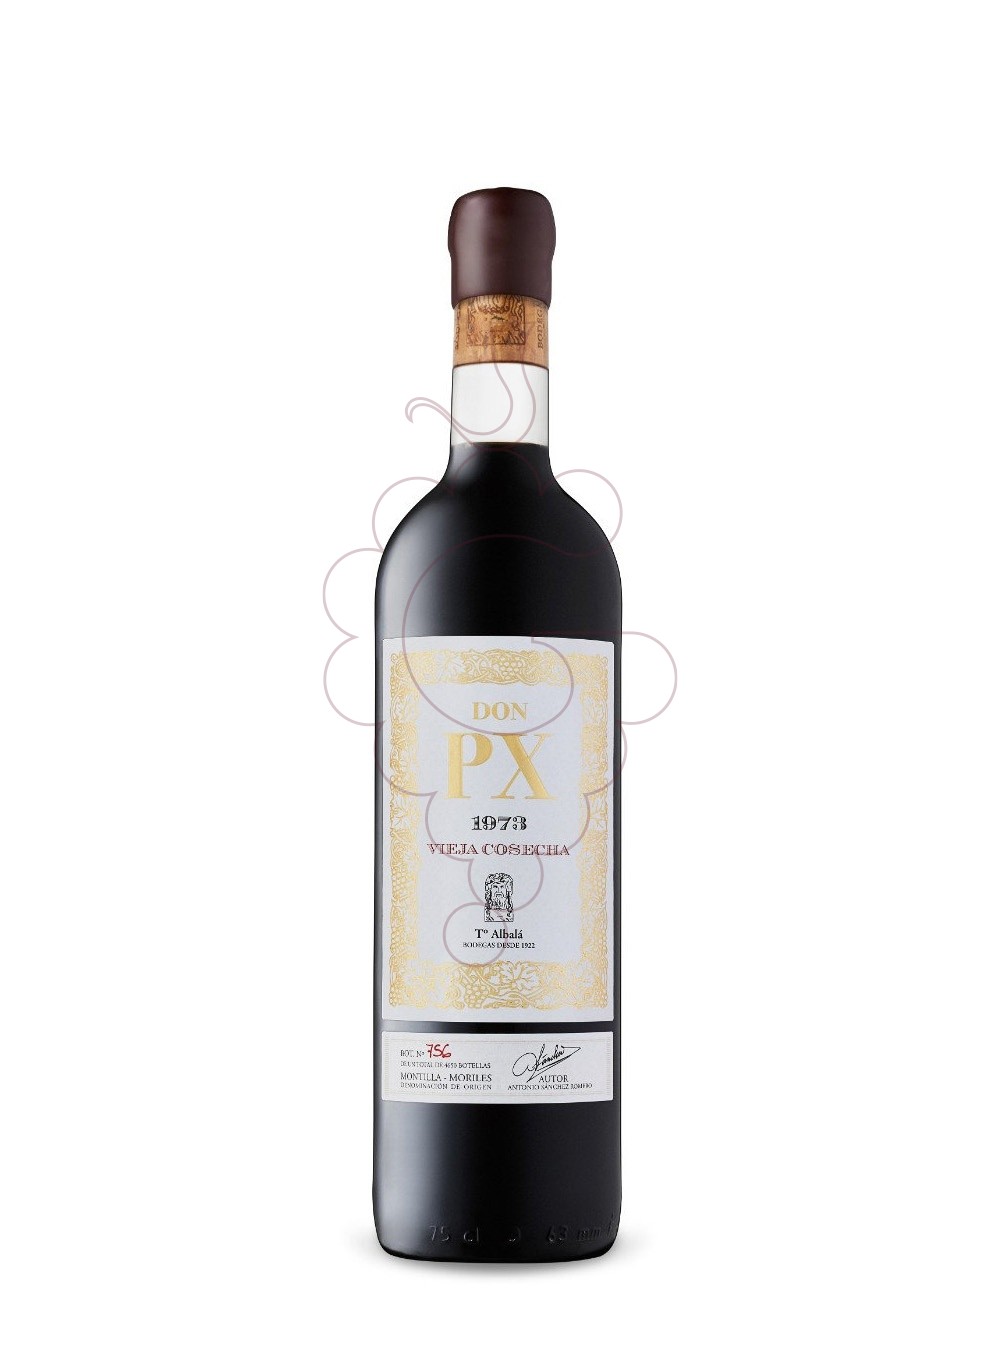 Photo Don PX  fortified wine